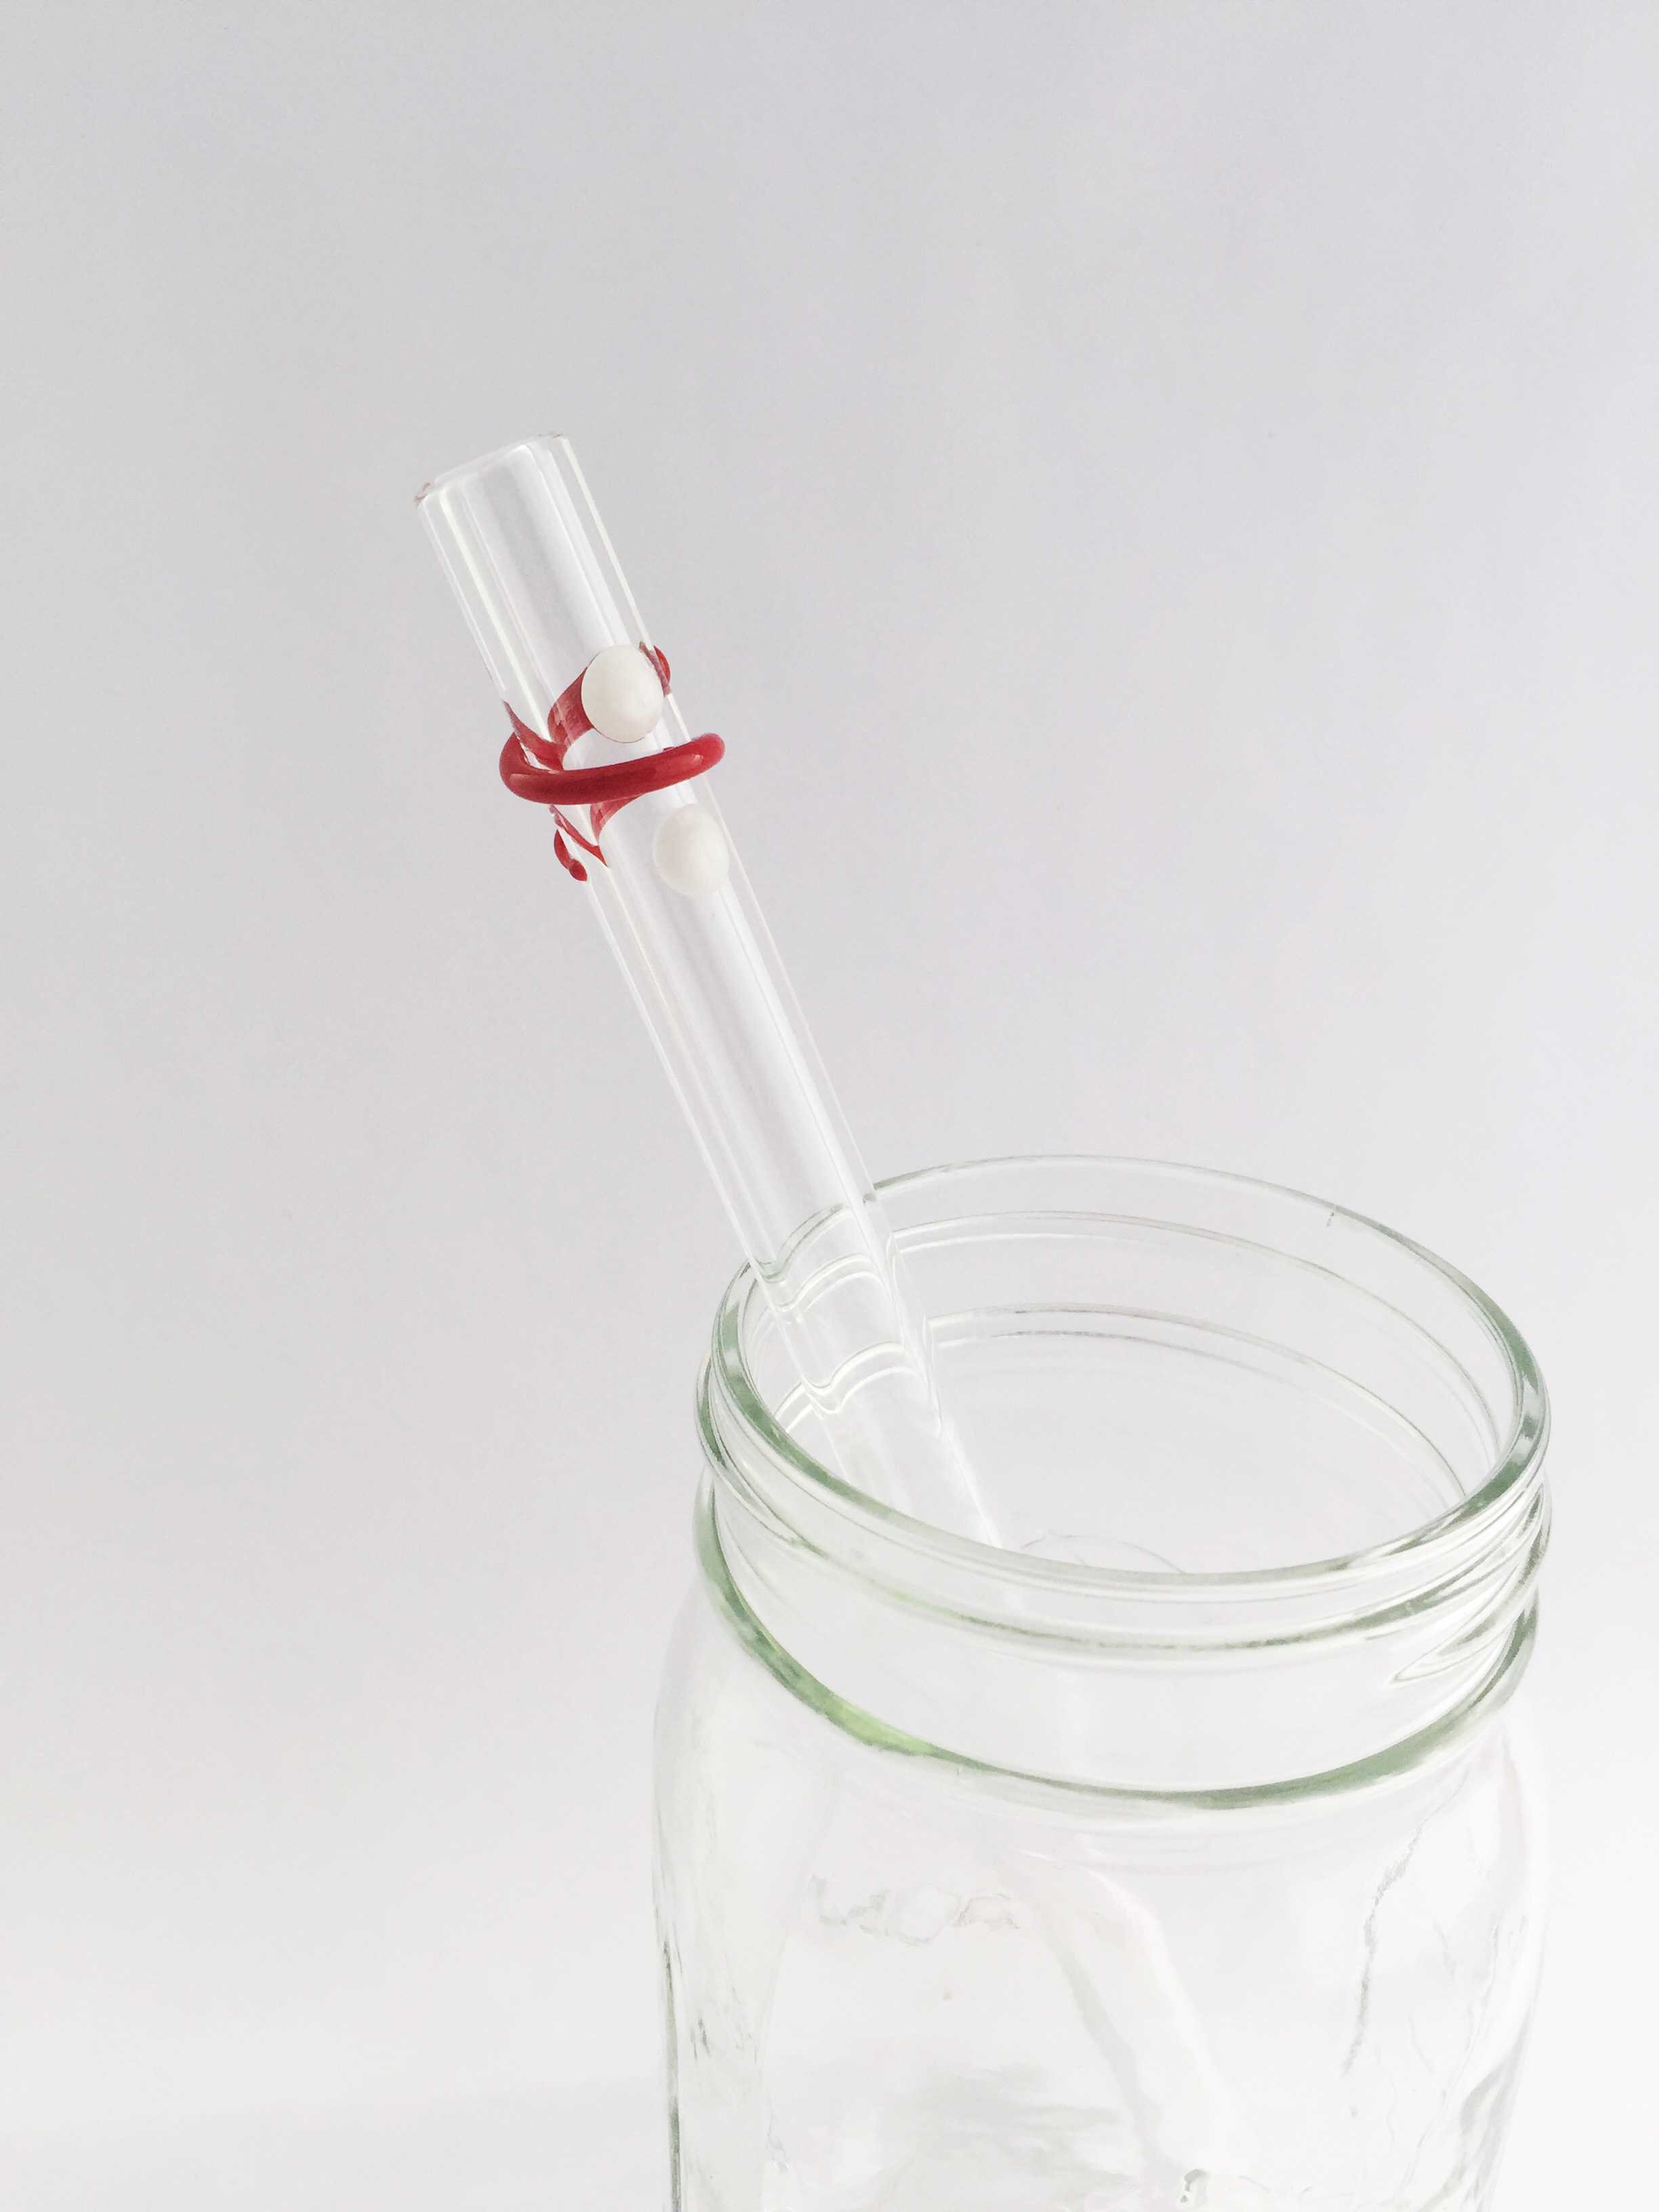 Environmental Defence - The Kick Out Toxics Straw